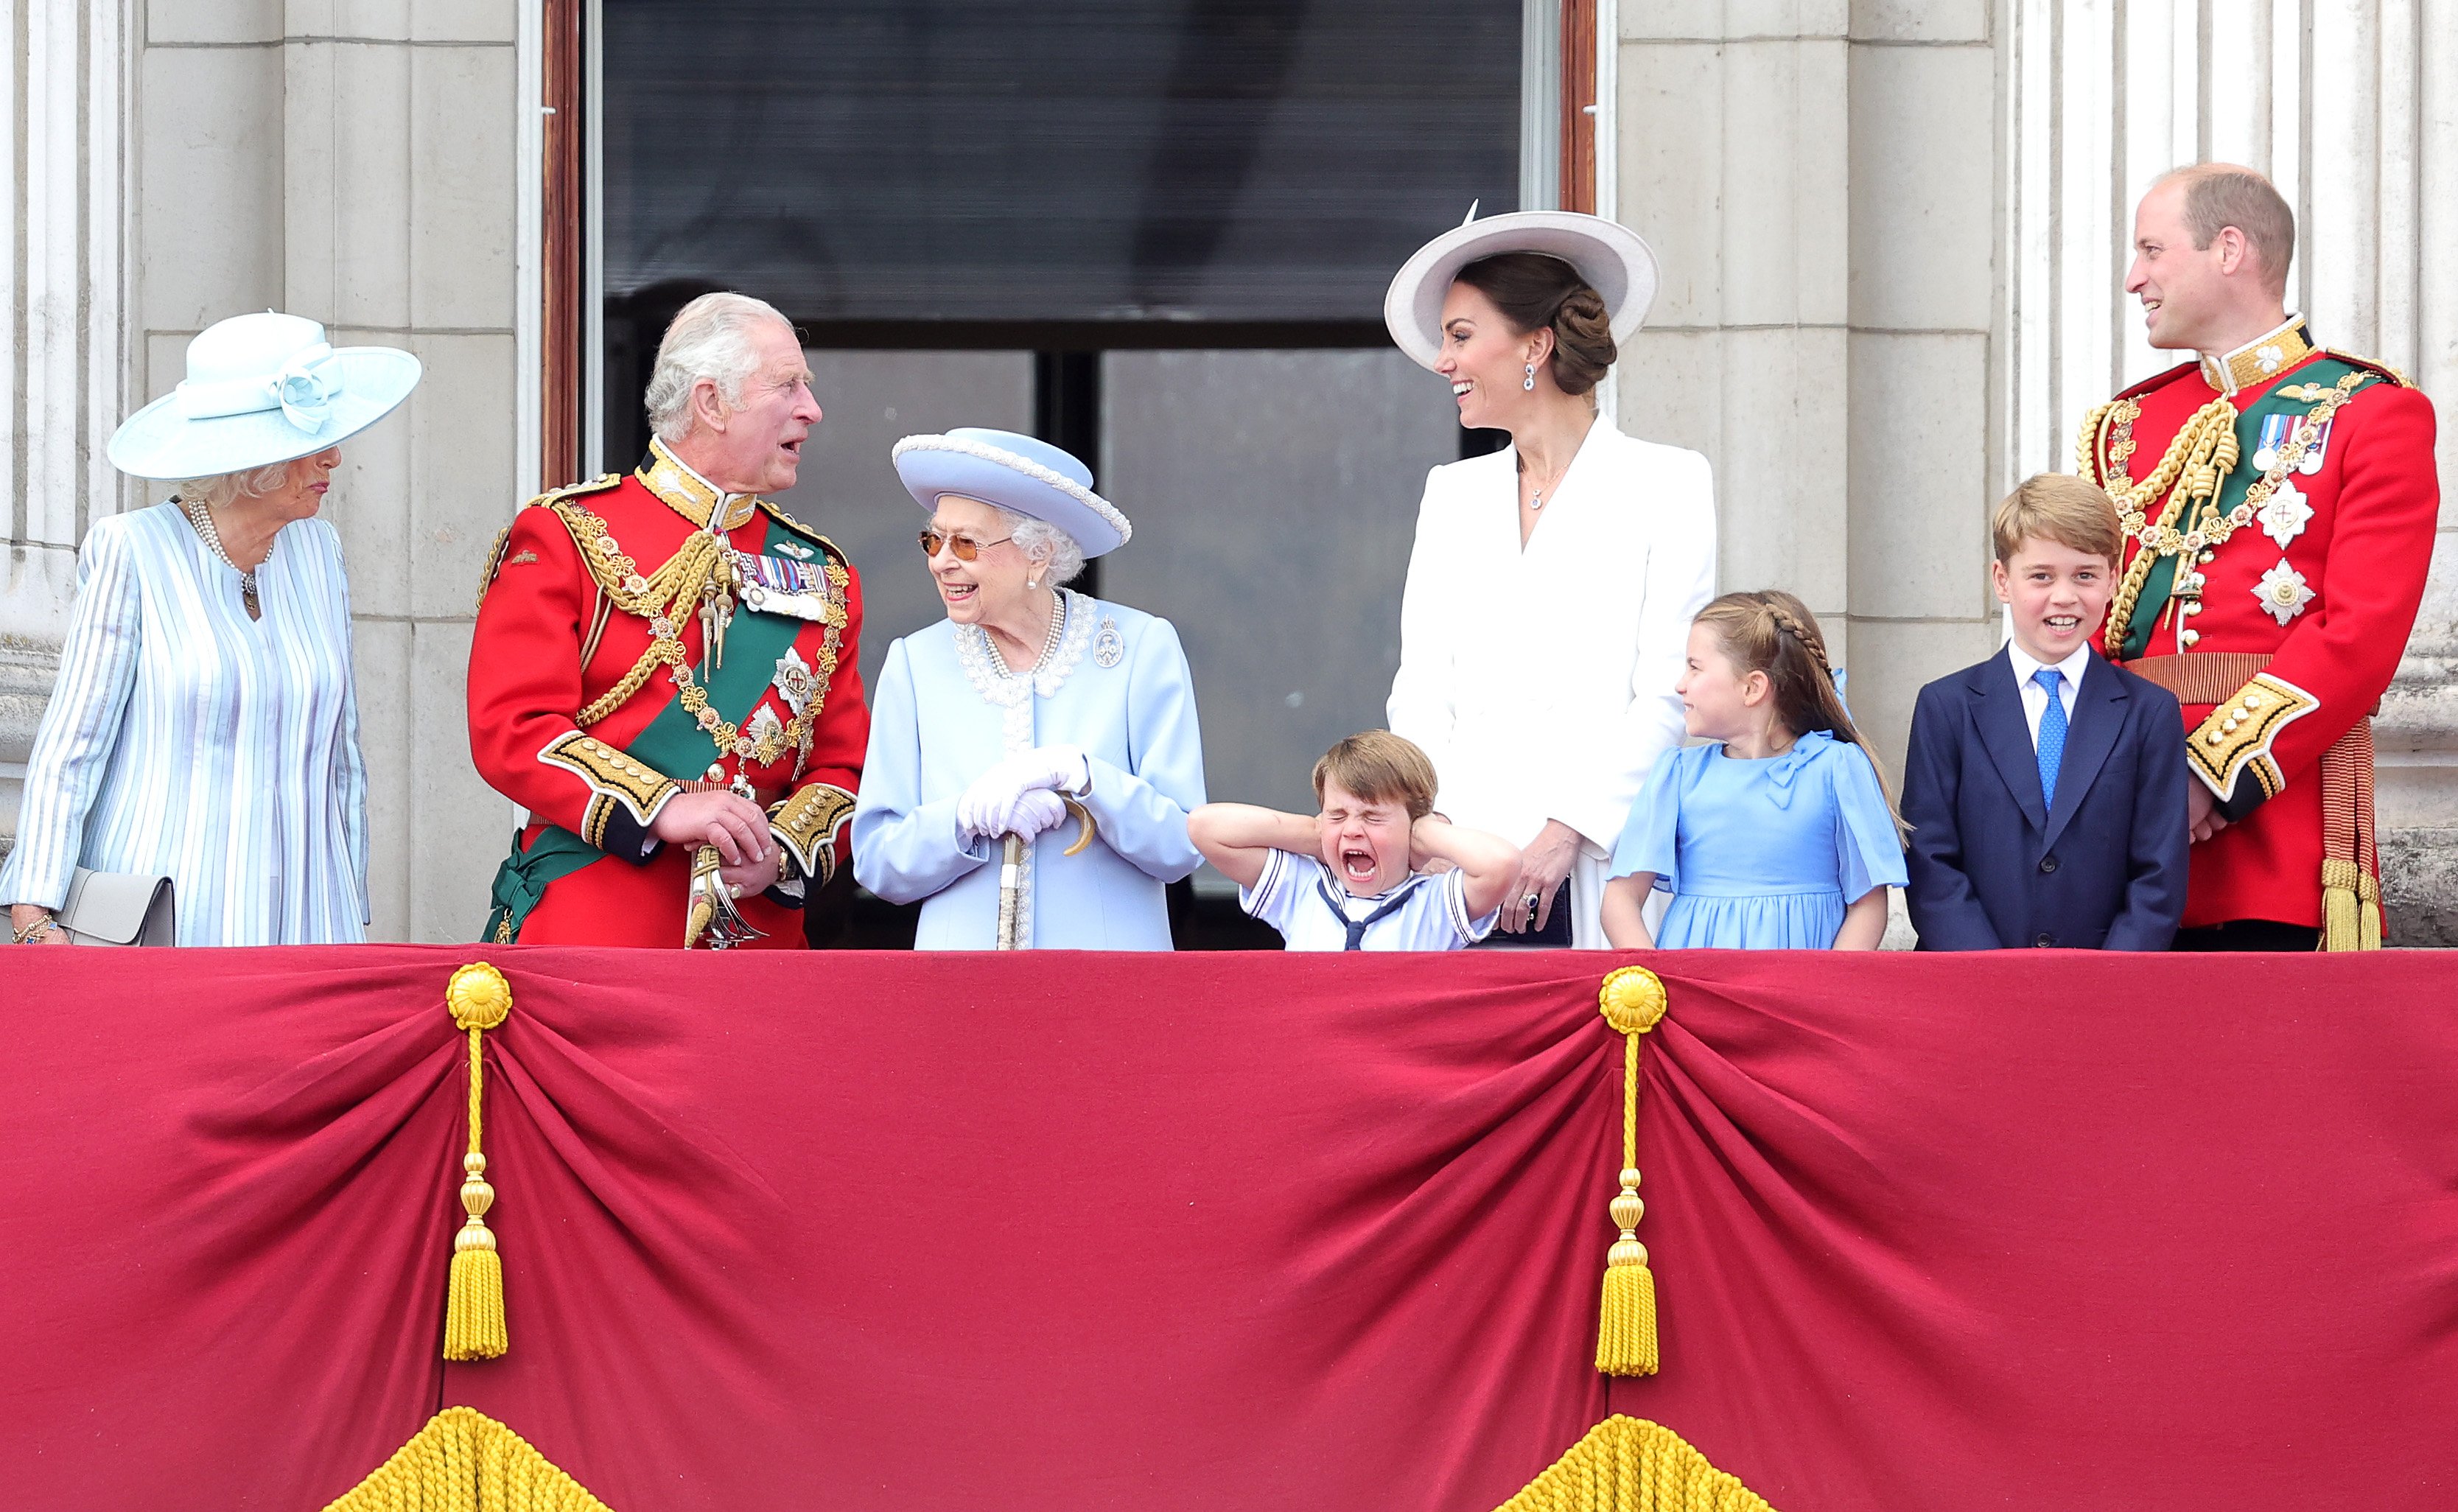 Queen Elizabeth II smiles on the balcony of Buckingham Palace during Trooping the Colour alongside Duchess of Cornwall, Prince Charles, Prince Louis of Cambridge, Catherine, Duchess of Cambridge, Princess Charlotte of Cambridge, Prince George of Cambridge, and Prince William during Trooping The Colour on June 02, 2022 in London, England | Source: Getty Images